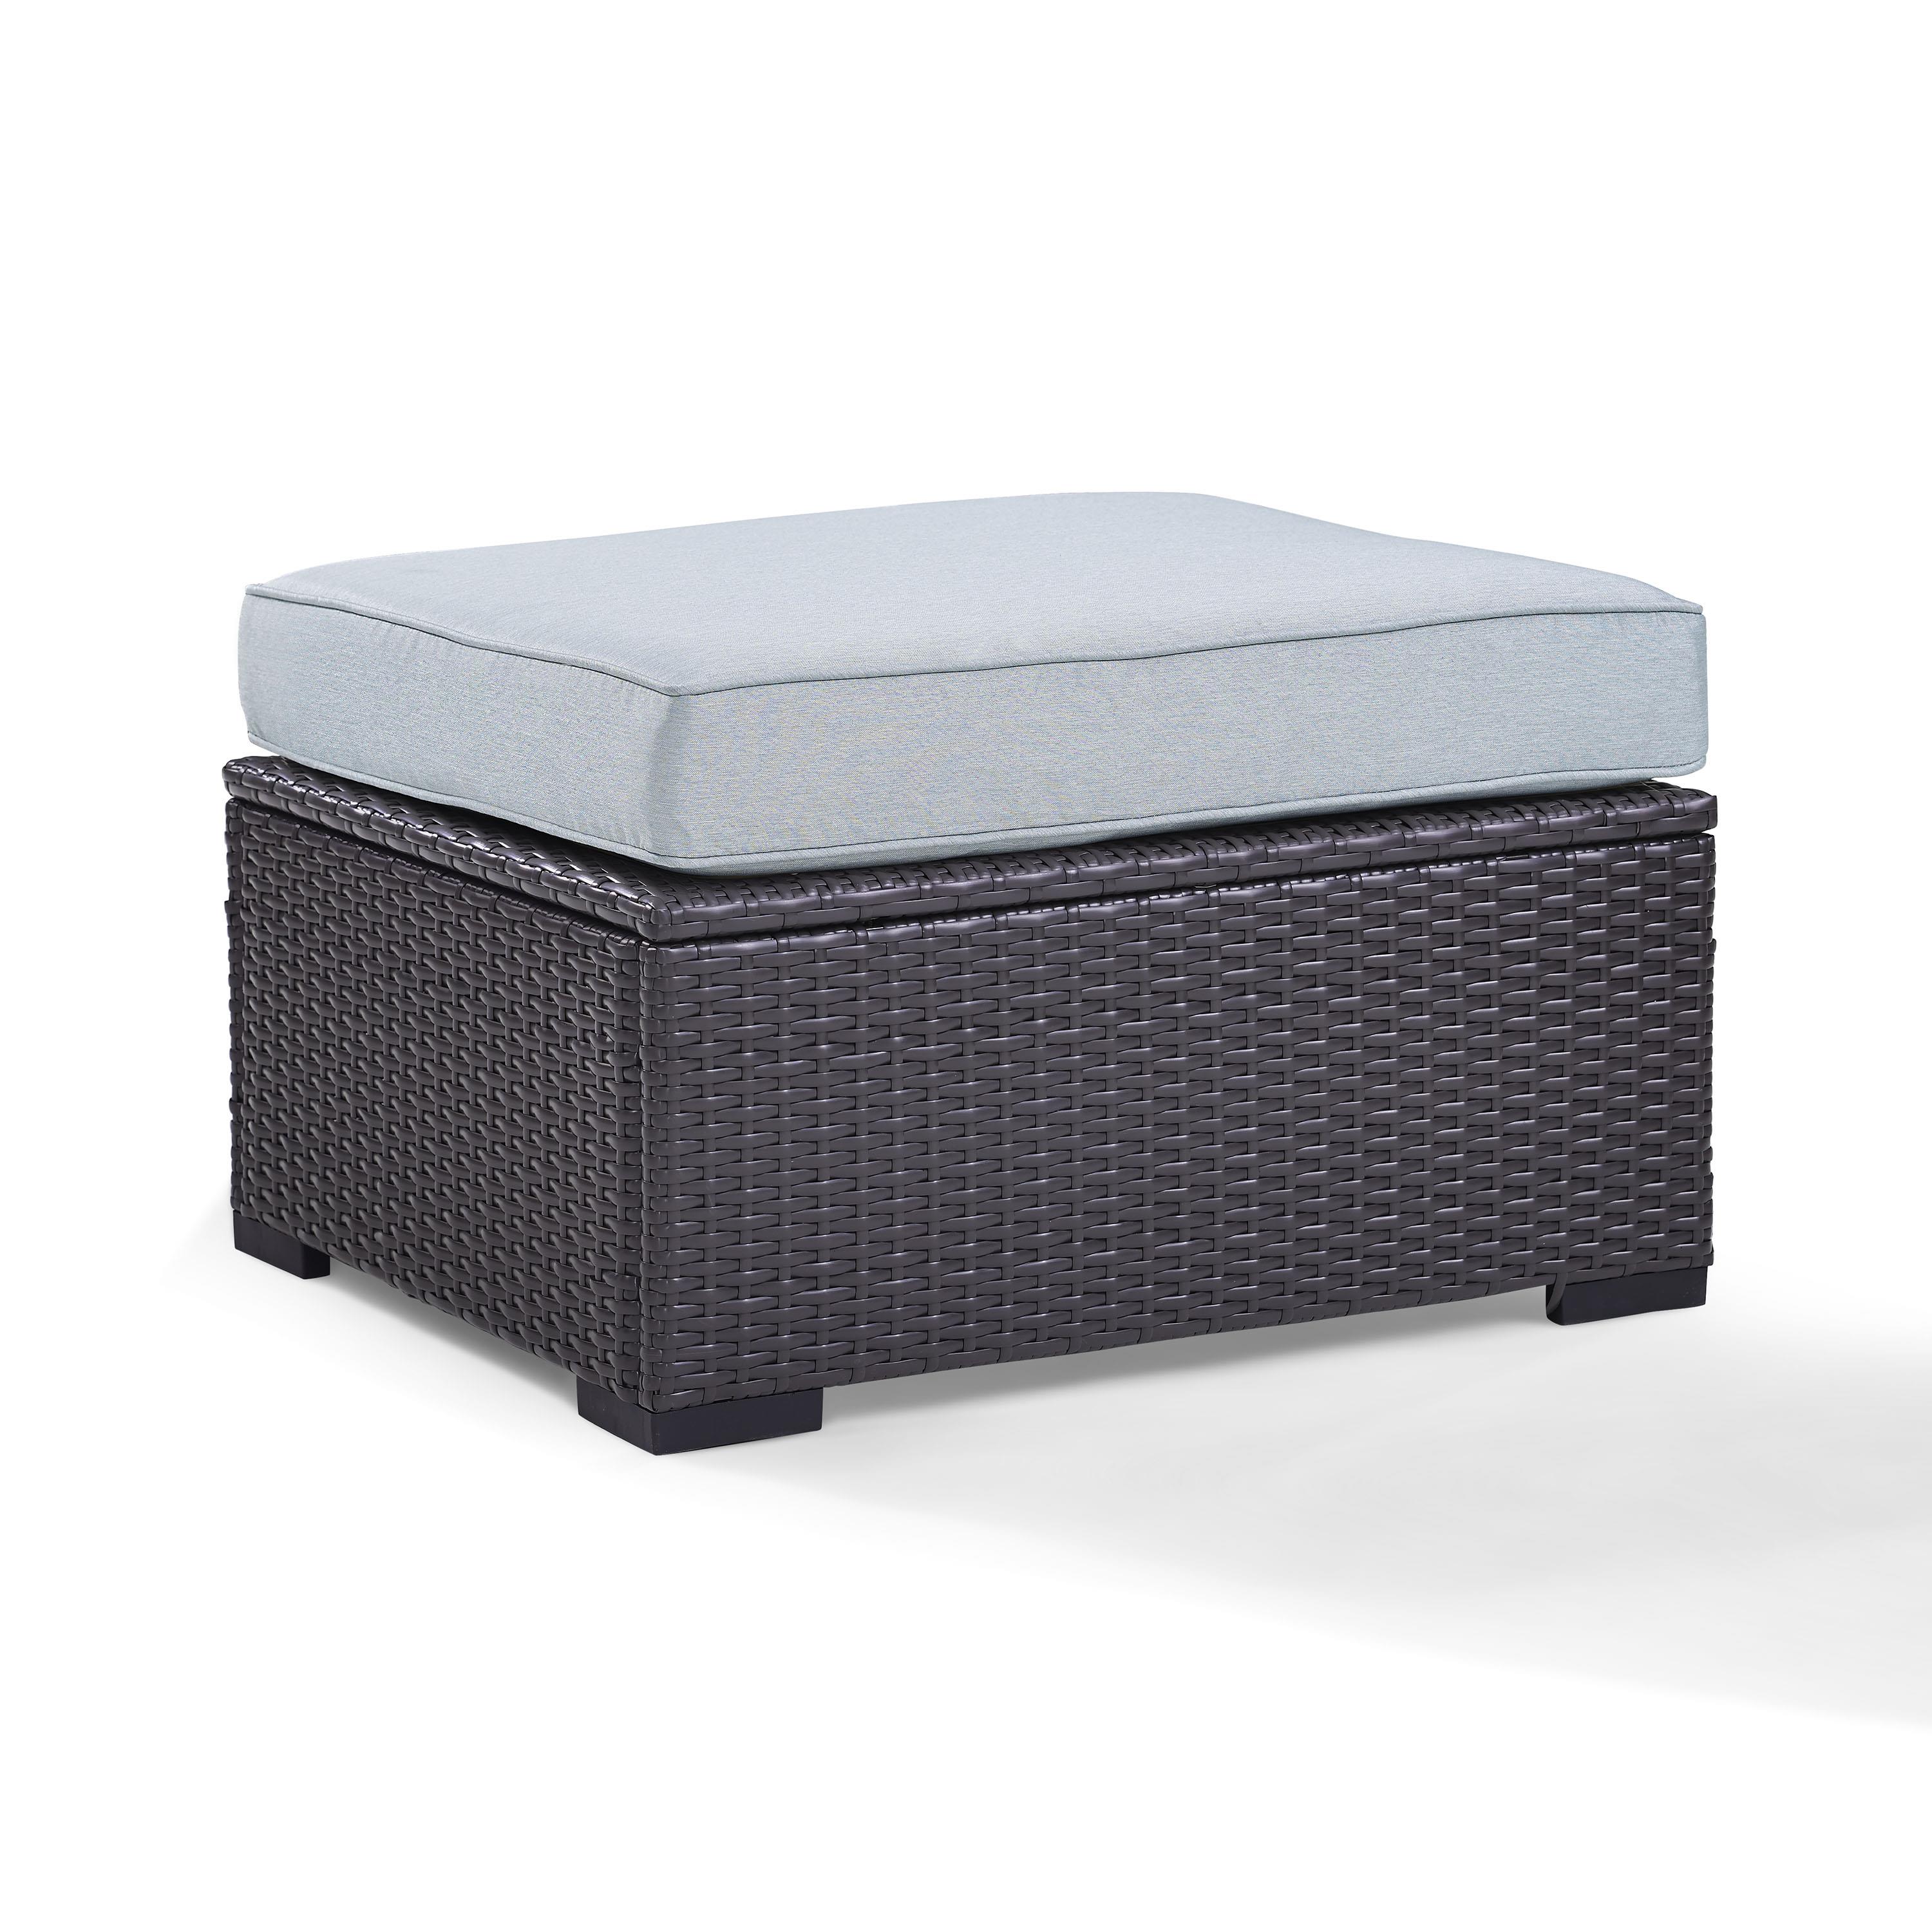 Crosley Biscayne Outdoor Wicker Ottoman White/Brown-Color:Brown,Style:Midst Cushions - image 3 of 5